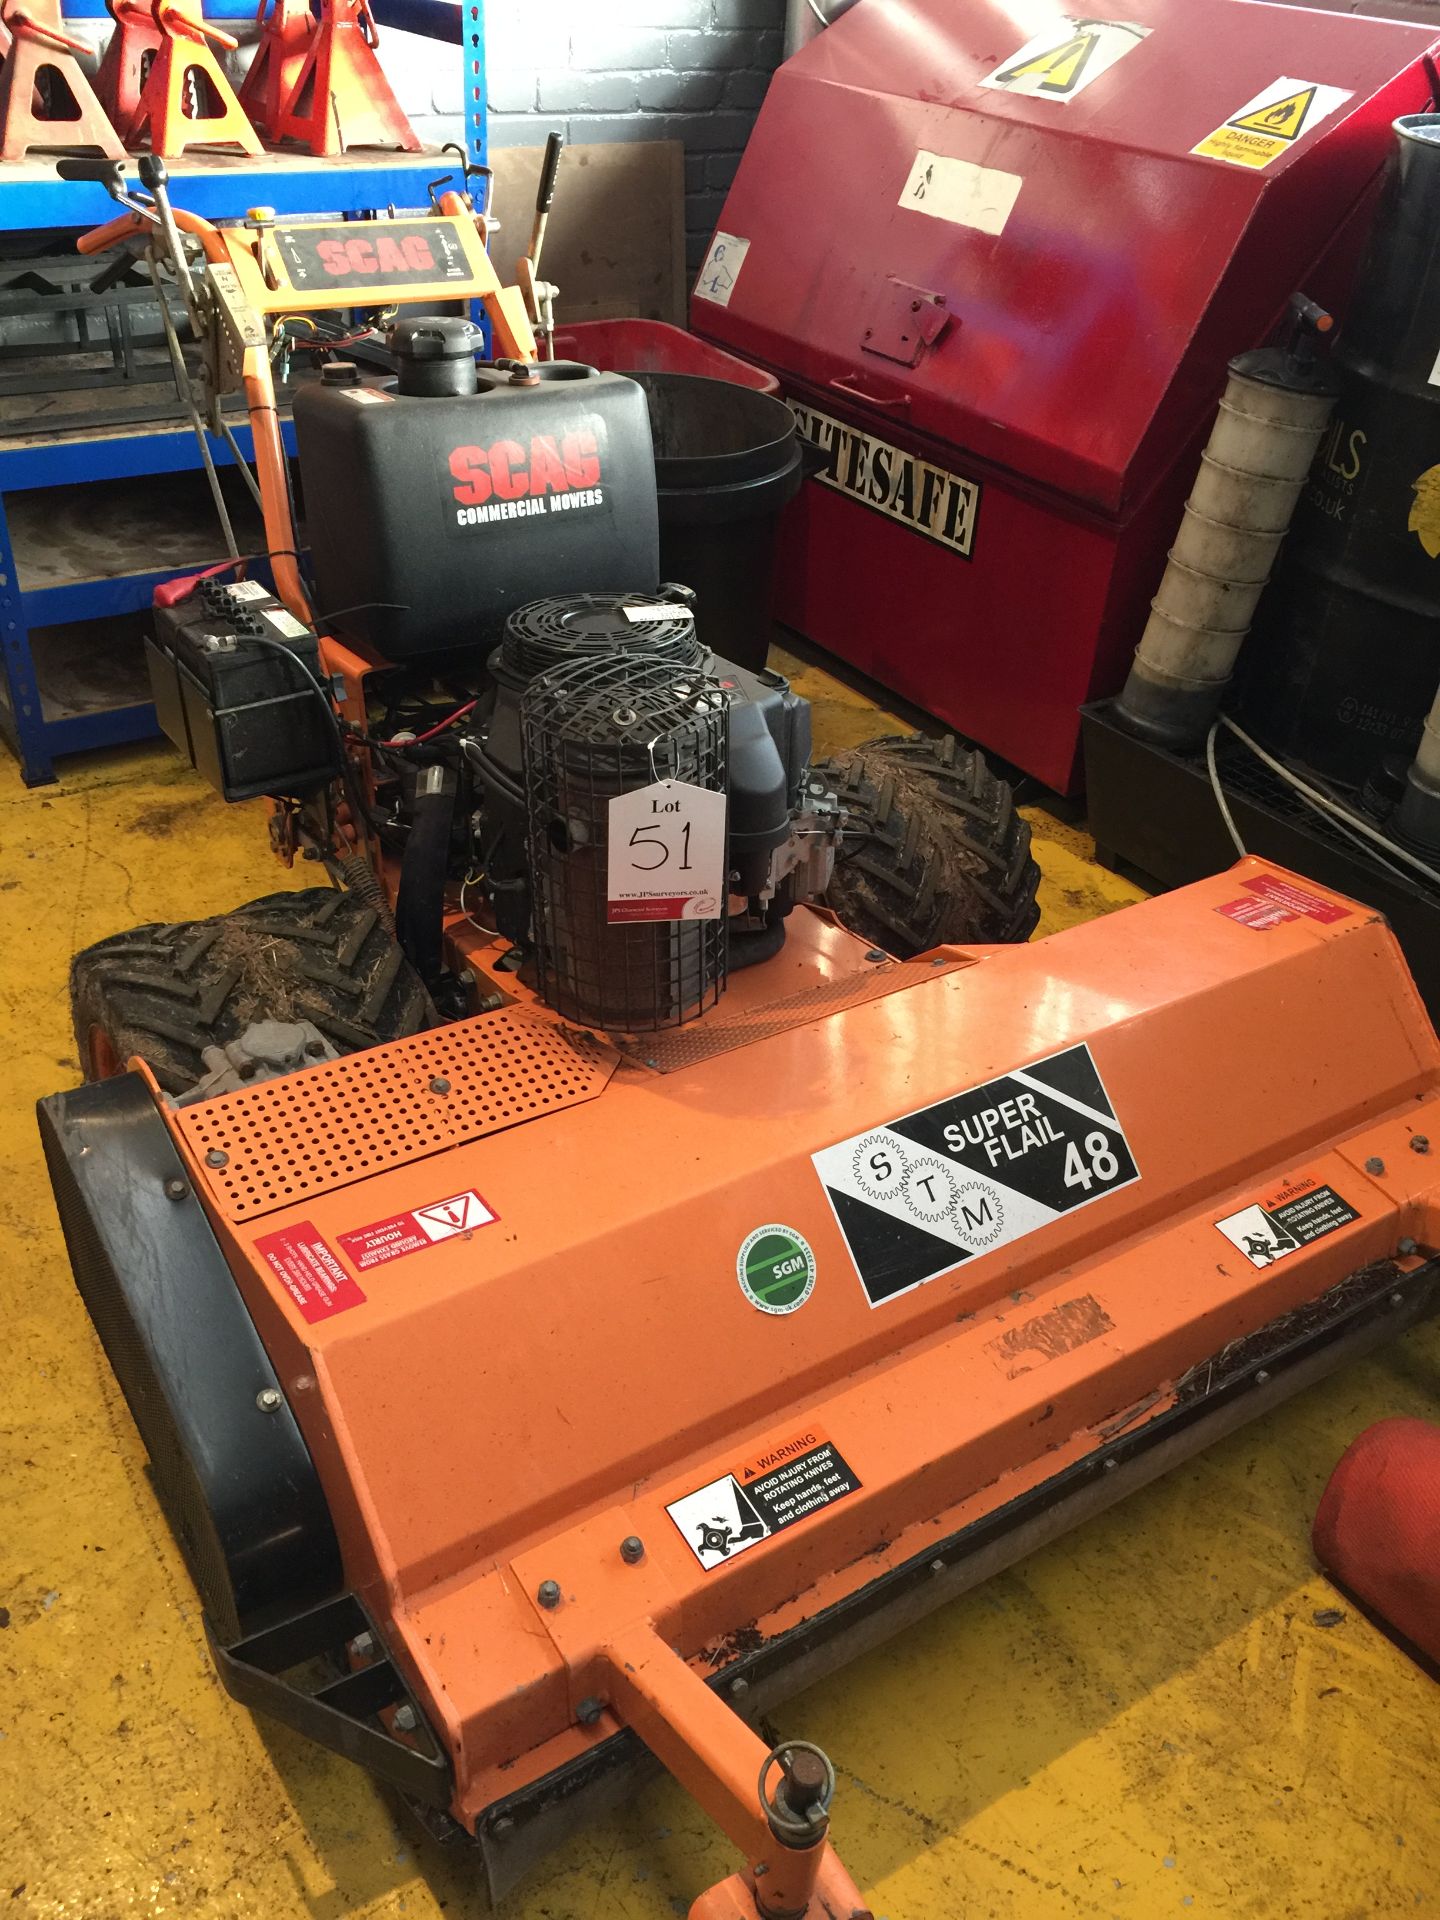 Scag SW236A14FS Pedestrian Rotary Mower with electric starter and Super flail 48 - Image 2 of 6